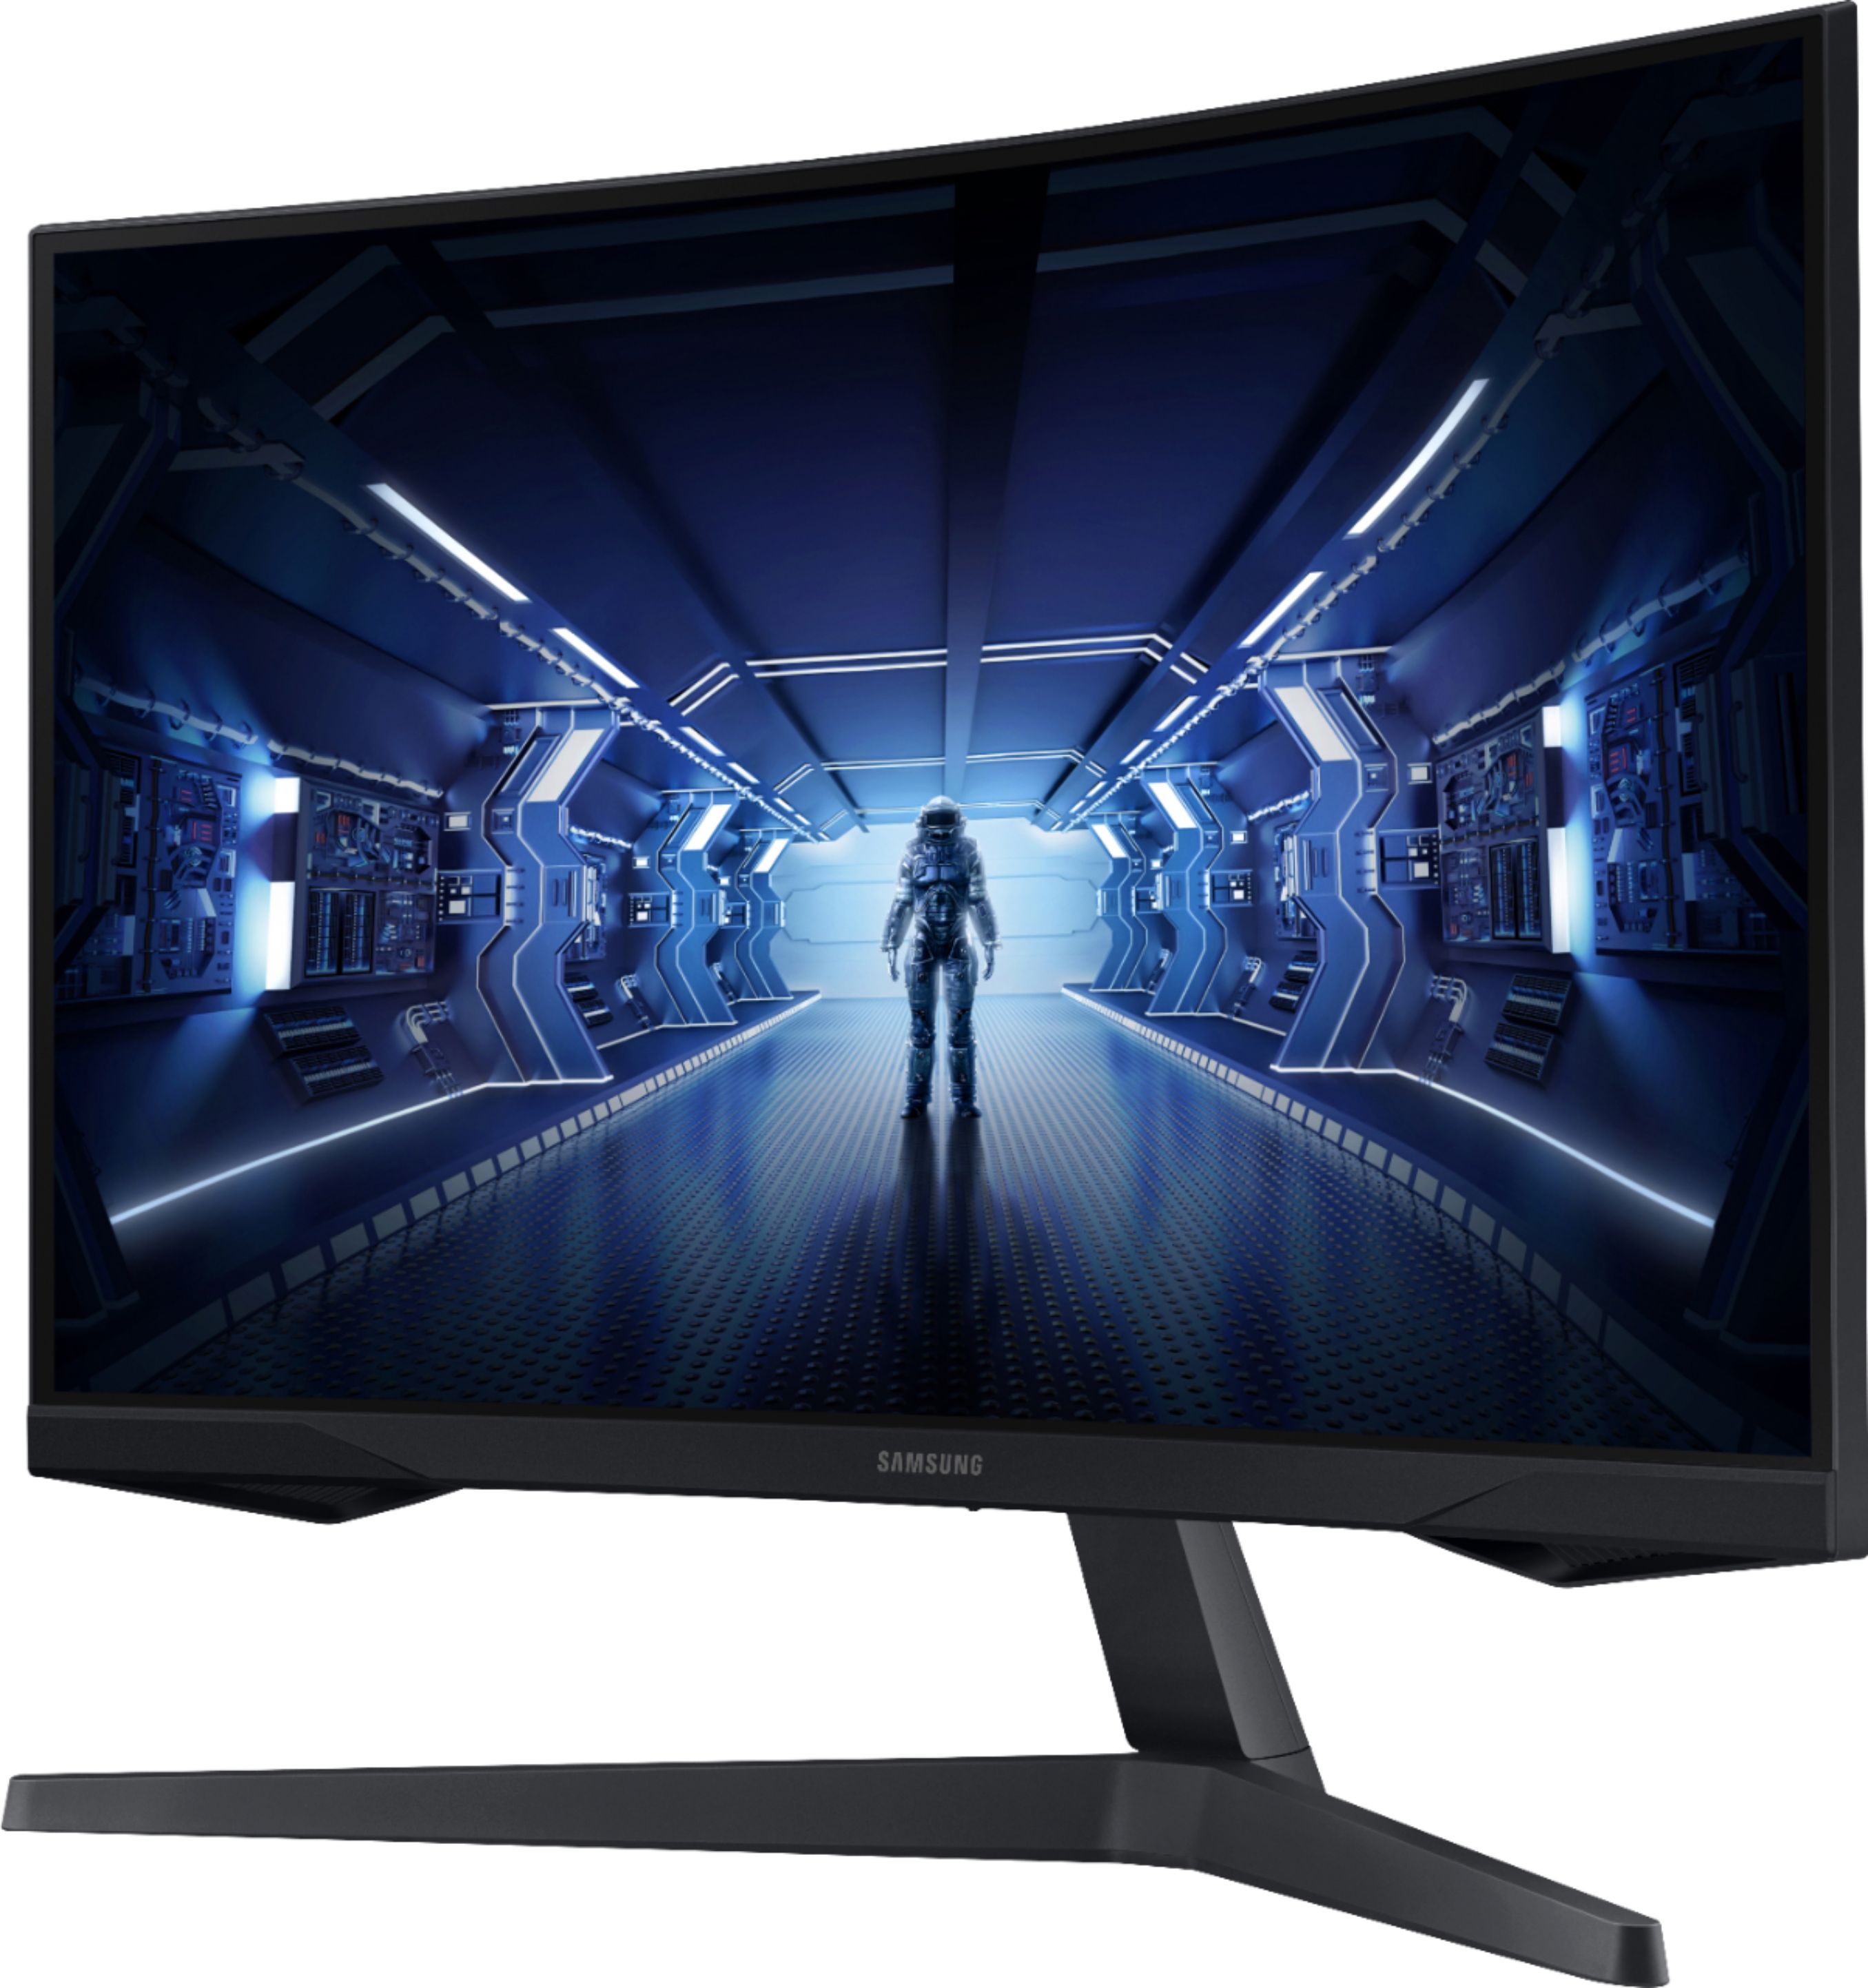 Left View: GIGABYTE - 27" LED Curved QHD FreeSync Monitor with HDR (HDMI, DisplayPort, USB) - Black